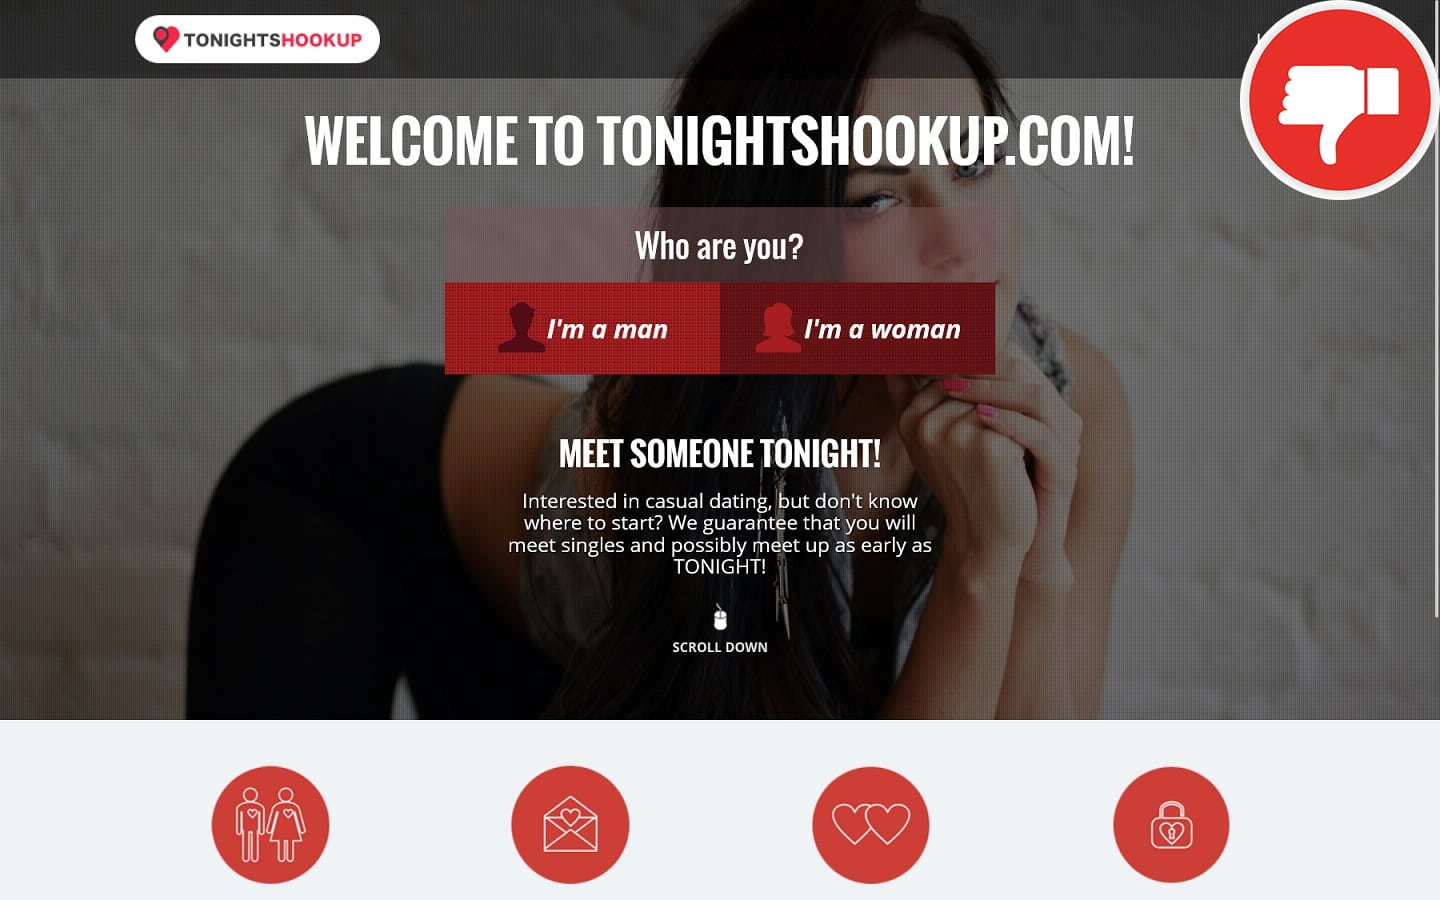 Review TonightsHookup.com scam experience